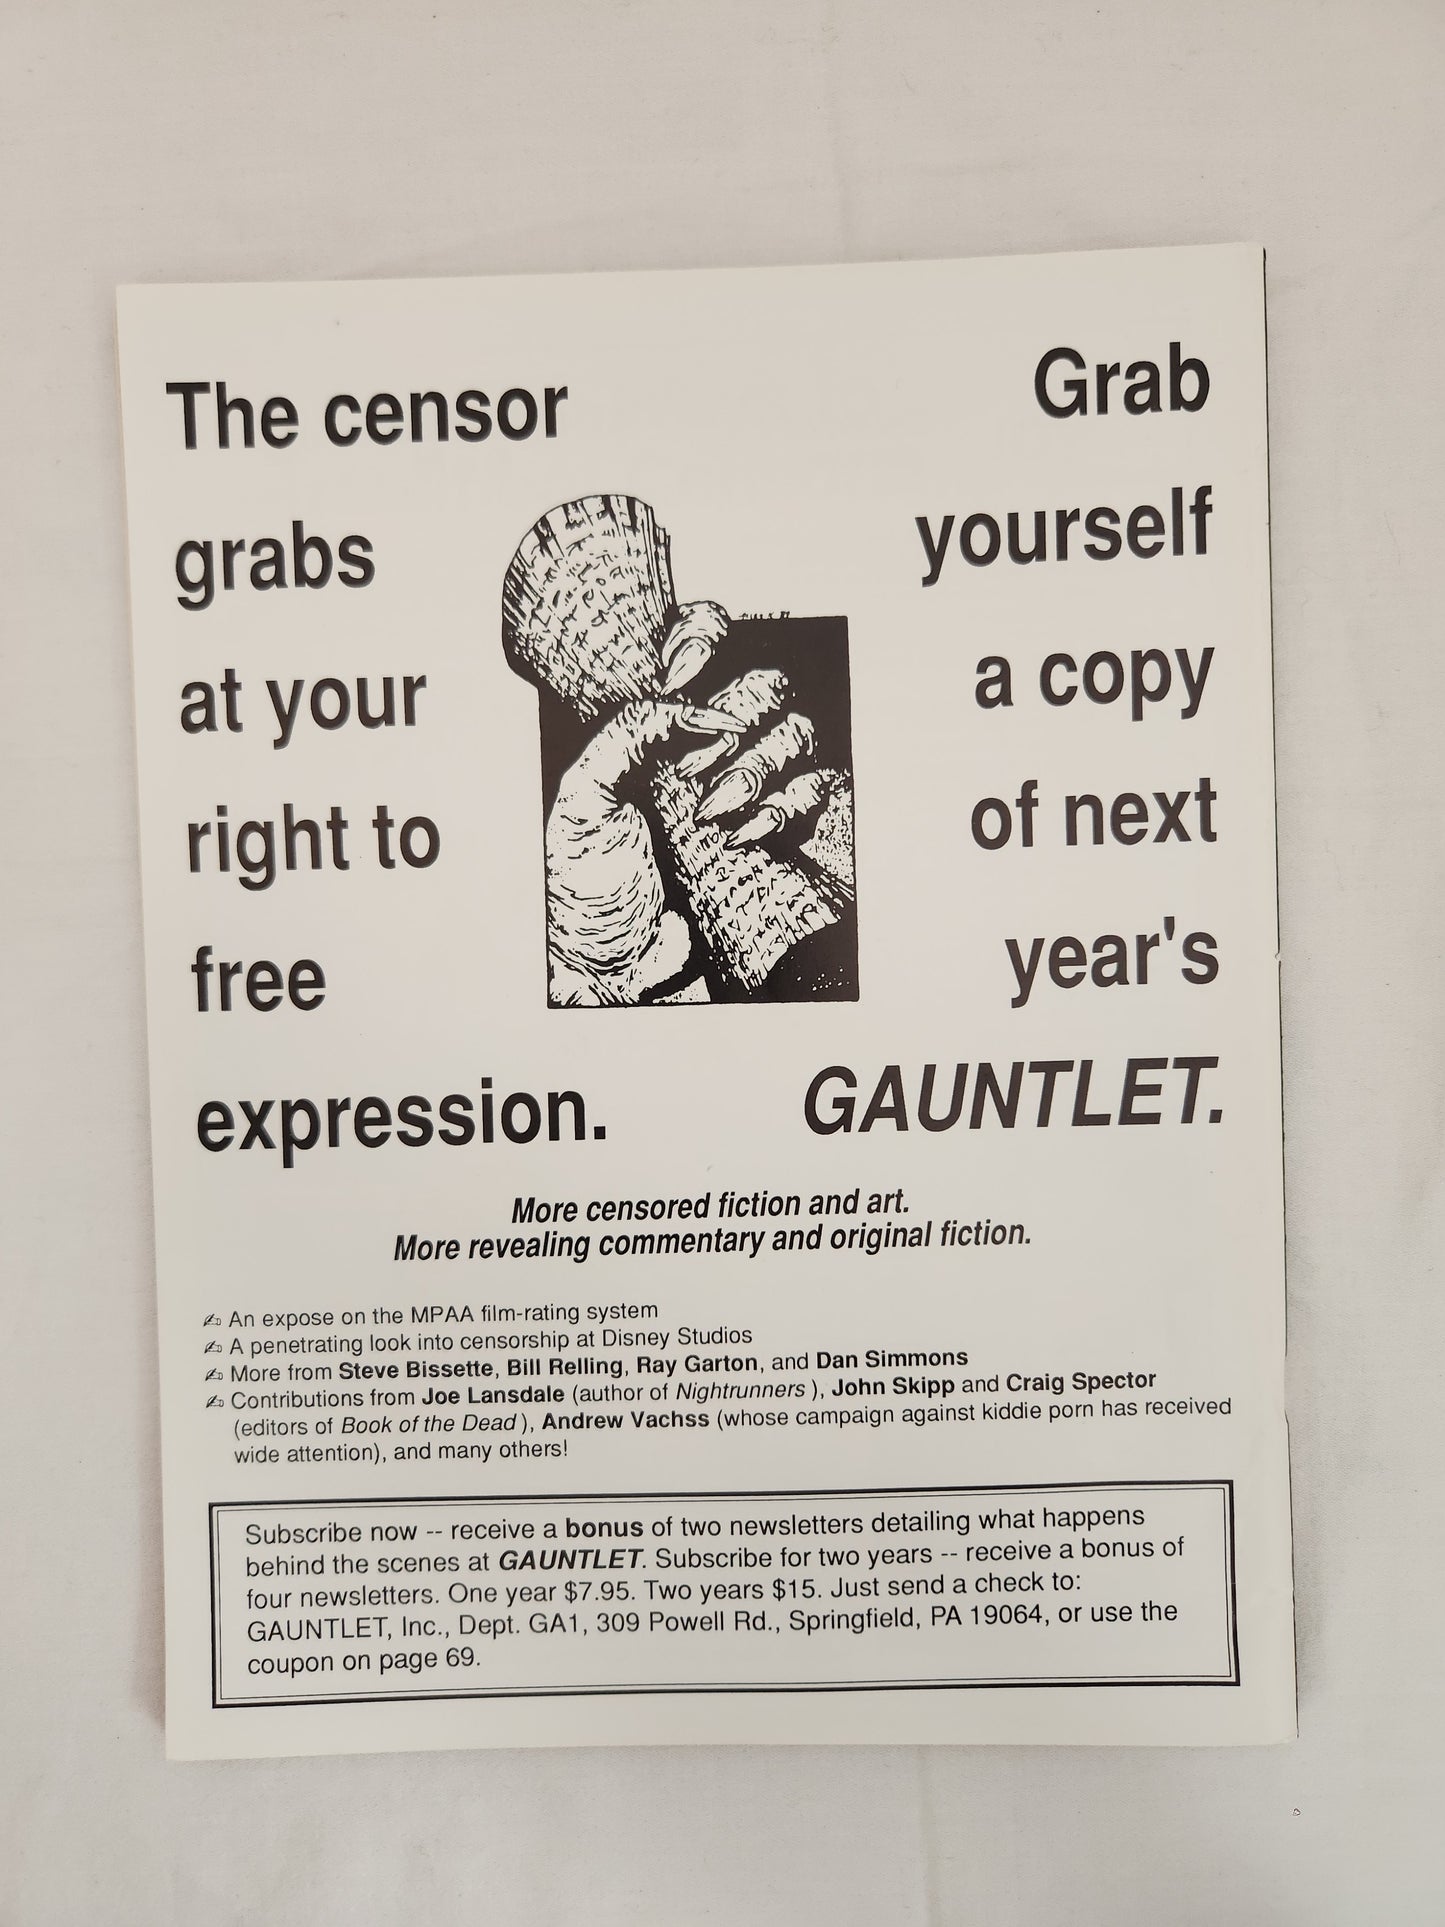 1990 Gauntlet: Exploring the Limits of Free Expression Premier Issue